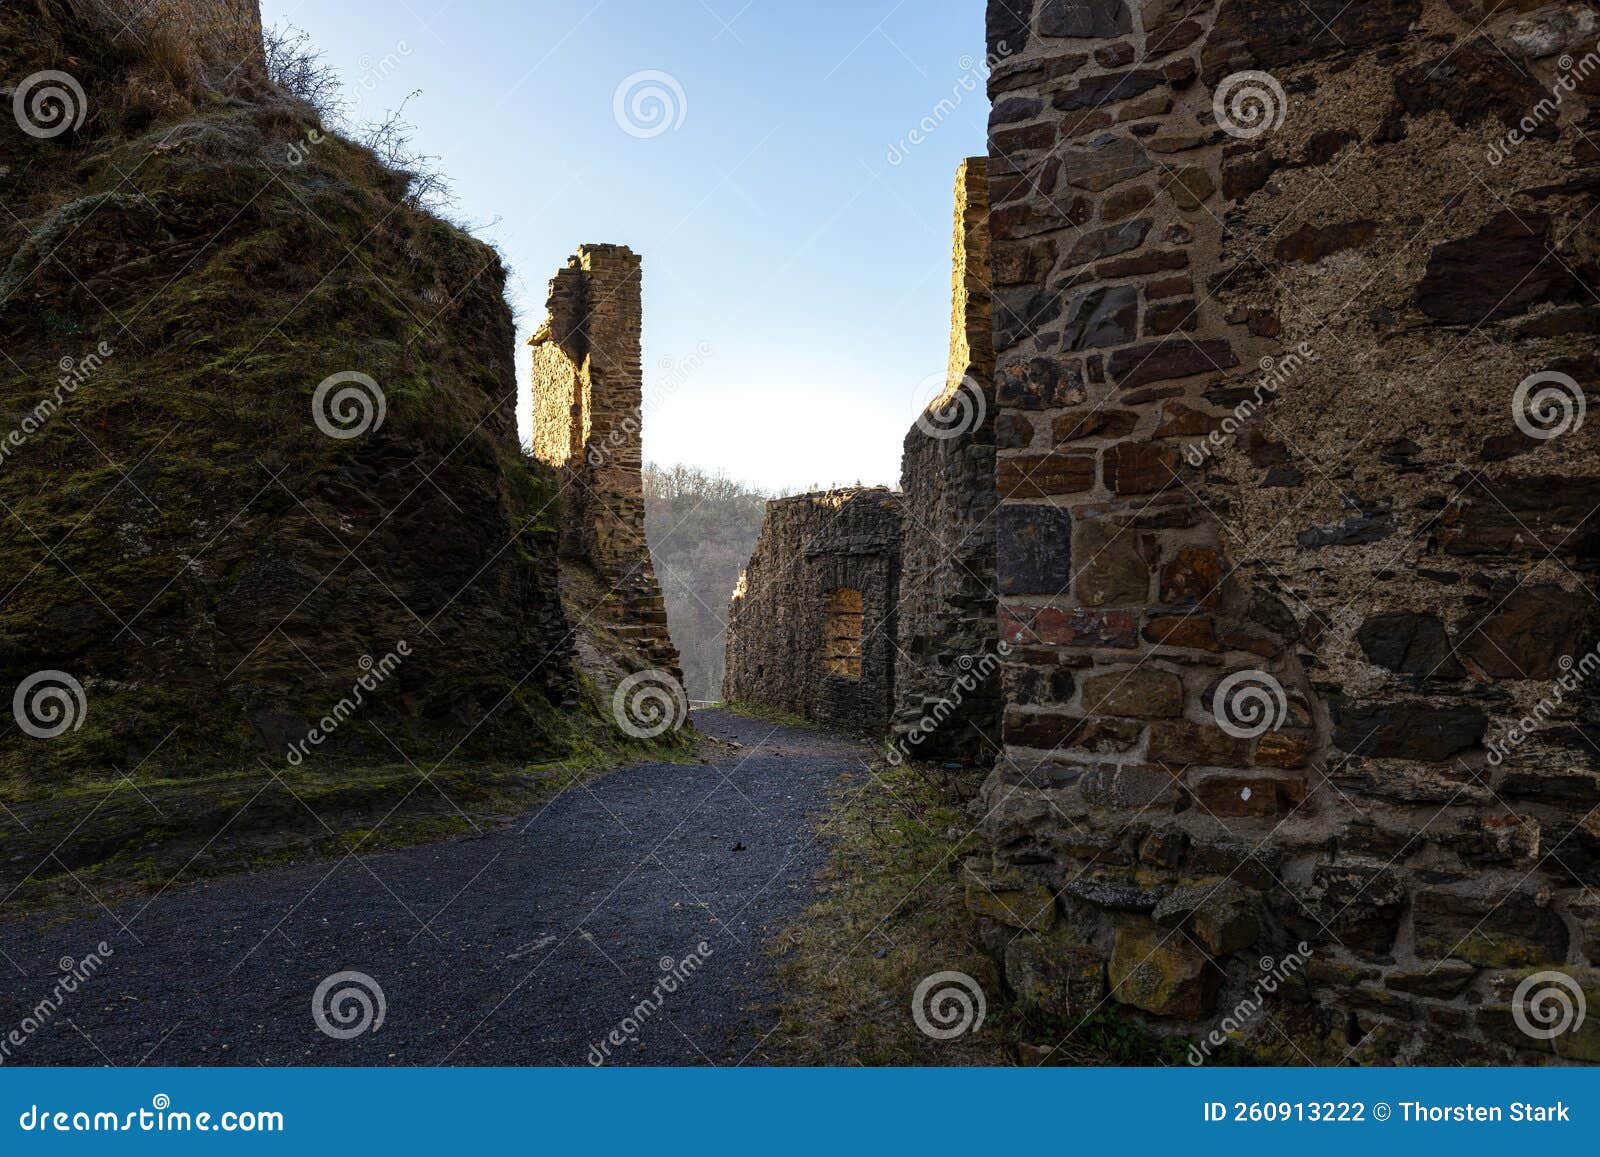 philippsburg castle ruins with castle tower near monreal in sunshine and a blue sky